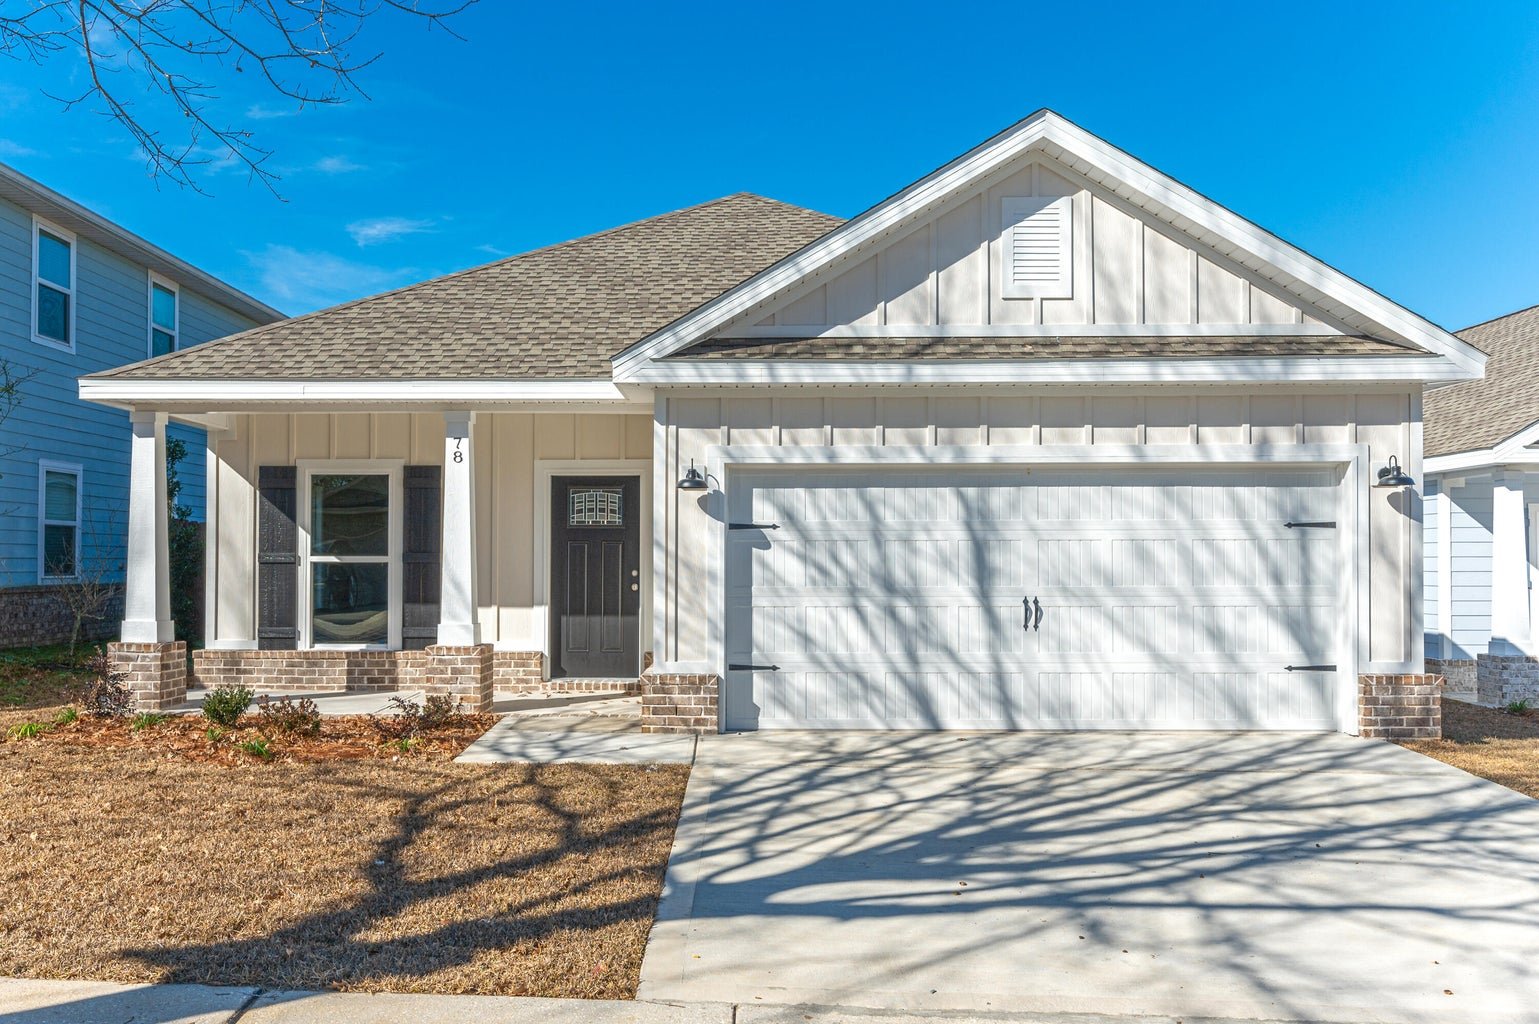 🏡 **Under Contract!** 🎉

We're thrilled to announce that this stunning Craftsman Style home in Freeport, FL, is now under contract! Located in the beautiful Lagrange Landing neighborhood, this brand-new home offers:

- 🛏️ 3 Bedrooms
- 🛁 2 Bathroo